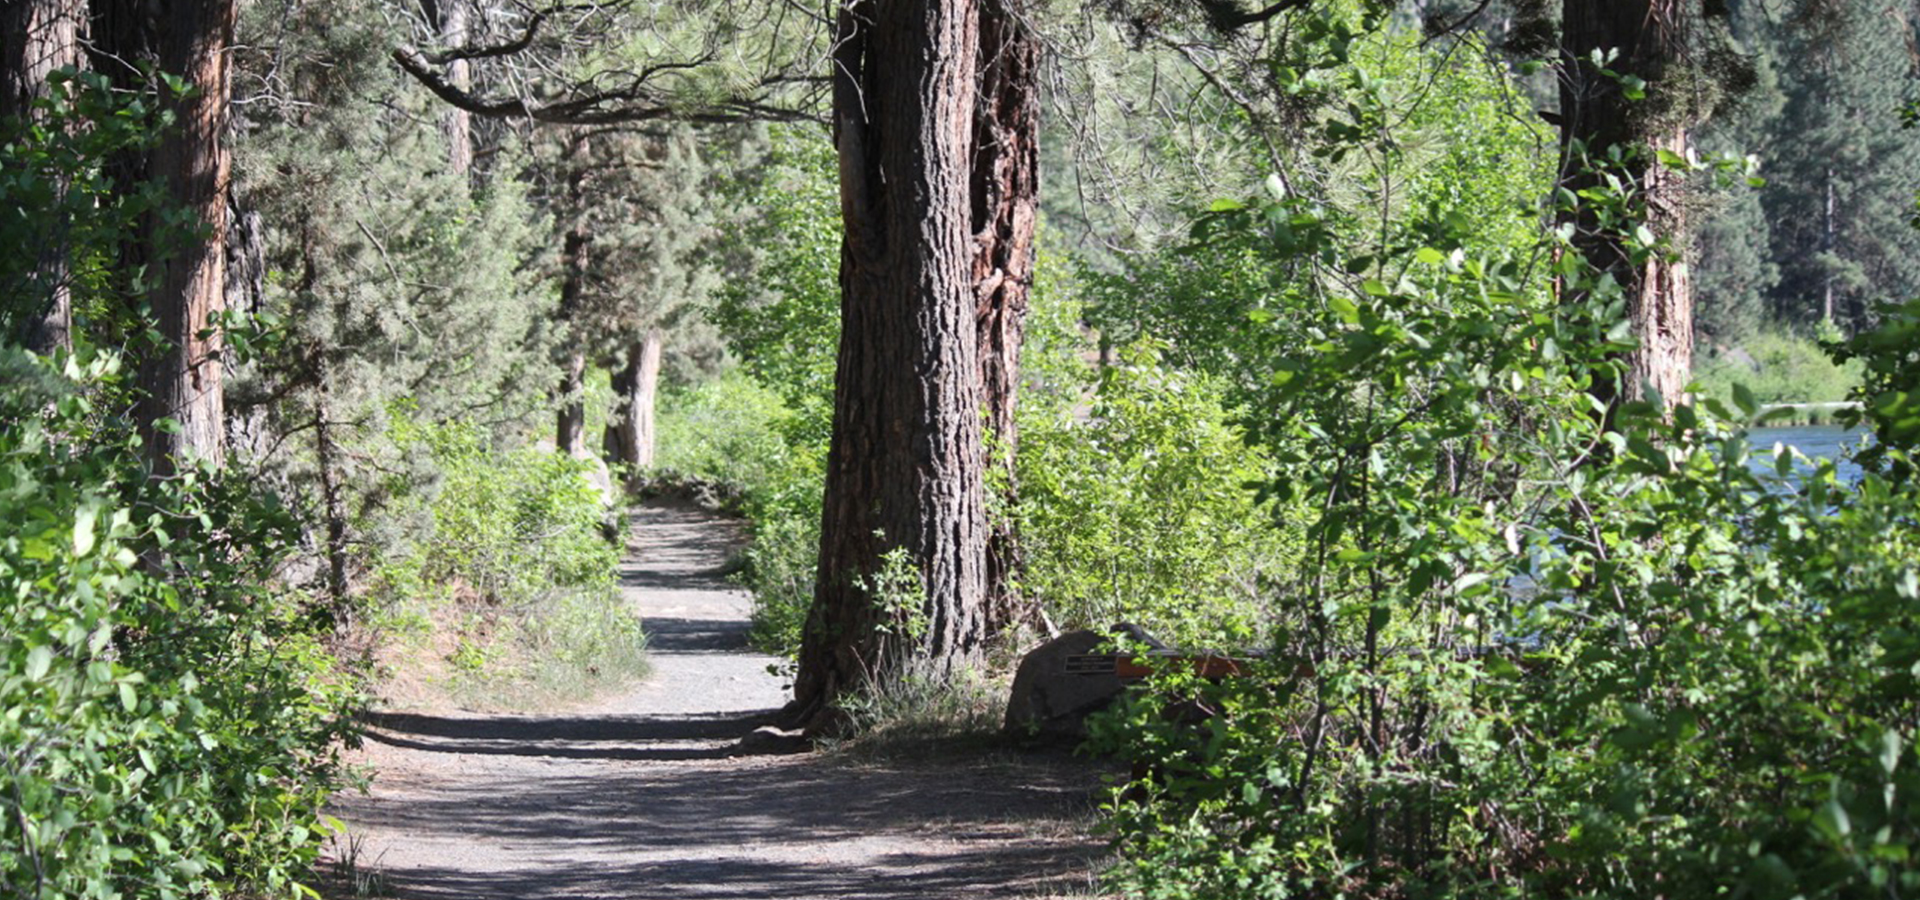 The Deschutes River Trail in Bend.